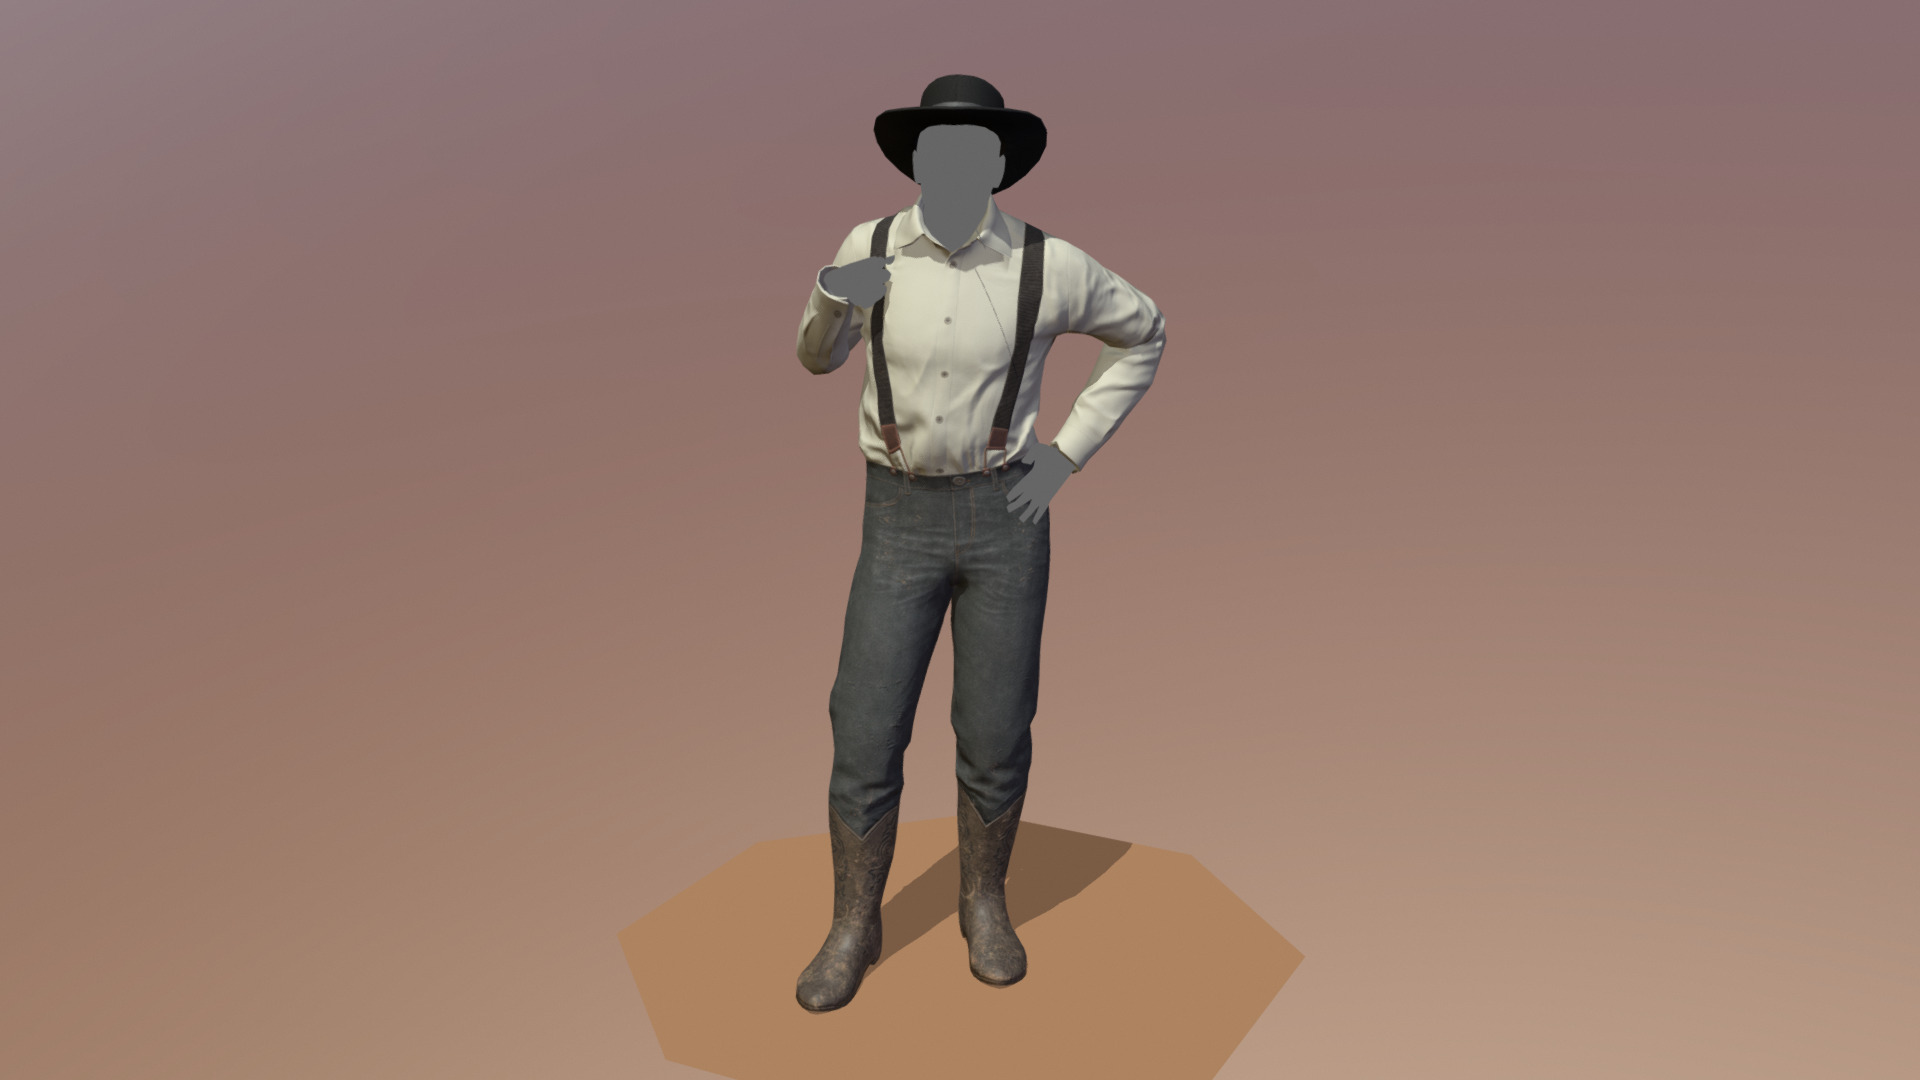 Second Outfit for the Dusty Roads RPG Arma 3 mod.

Modeling process: https://youtu.be/THMPZvehlEQ - Cowboy Outfit 2 - 3D model by Vladimir E. (@Room_42) 3d model